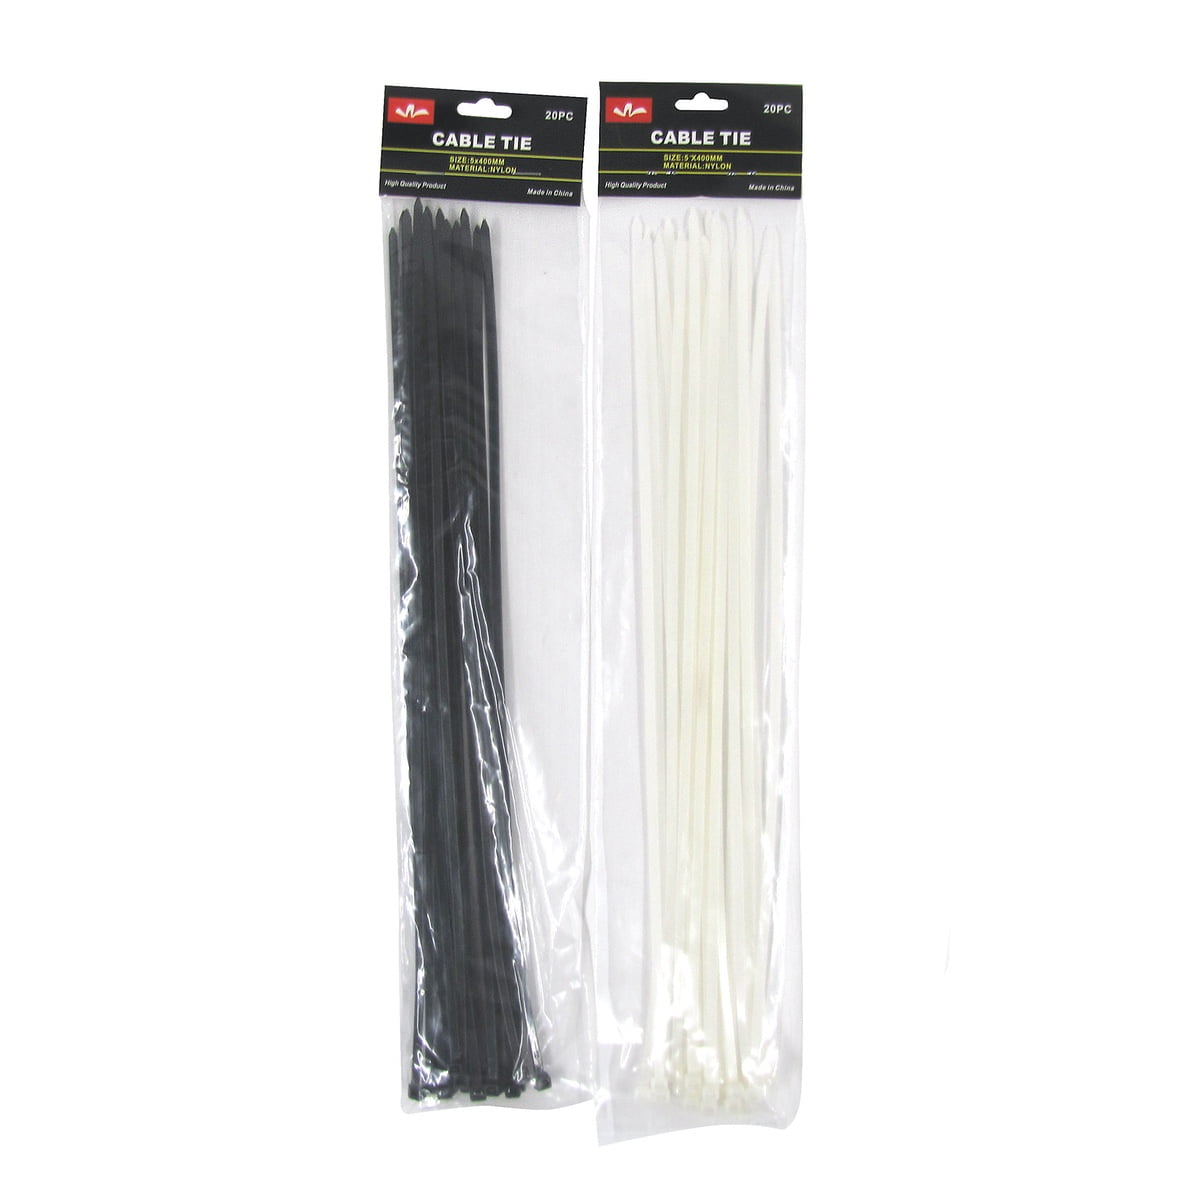 Nylon Zipper Ties Extra-long And Extra-large Cable Ties Plastic Cable Ties 